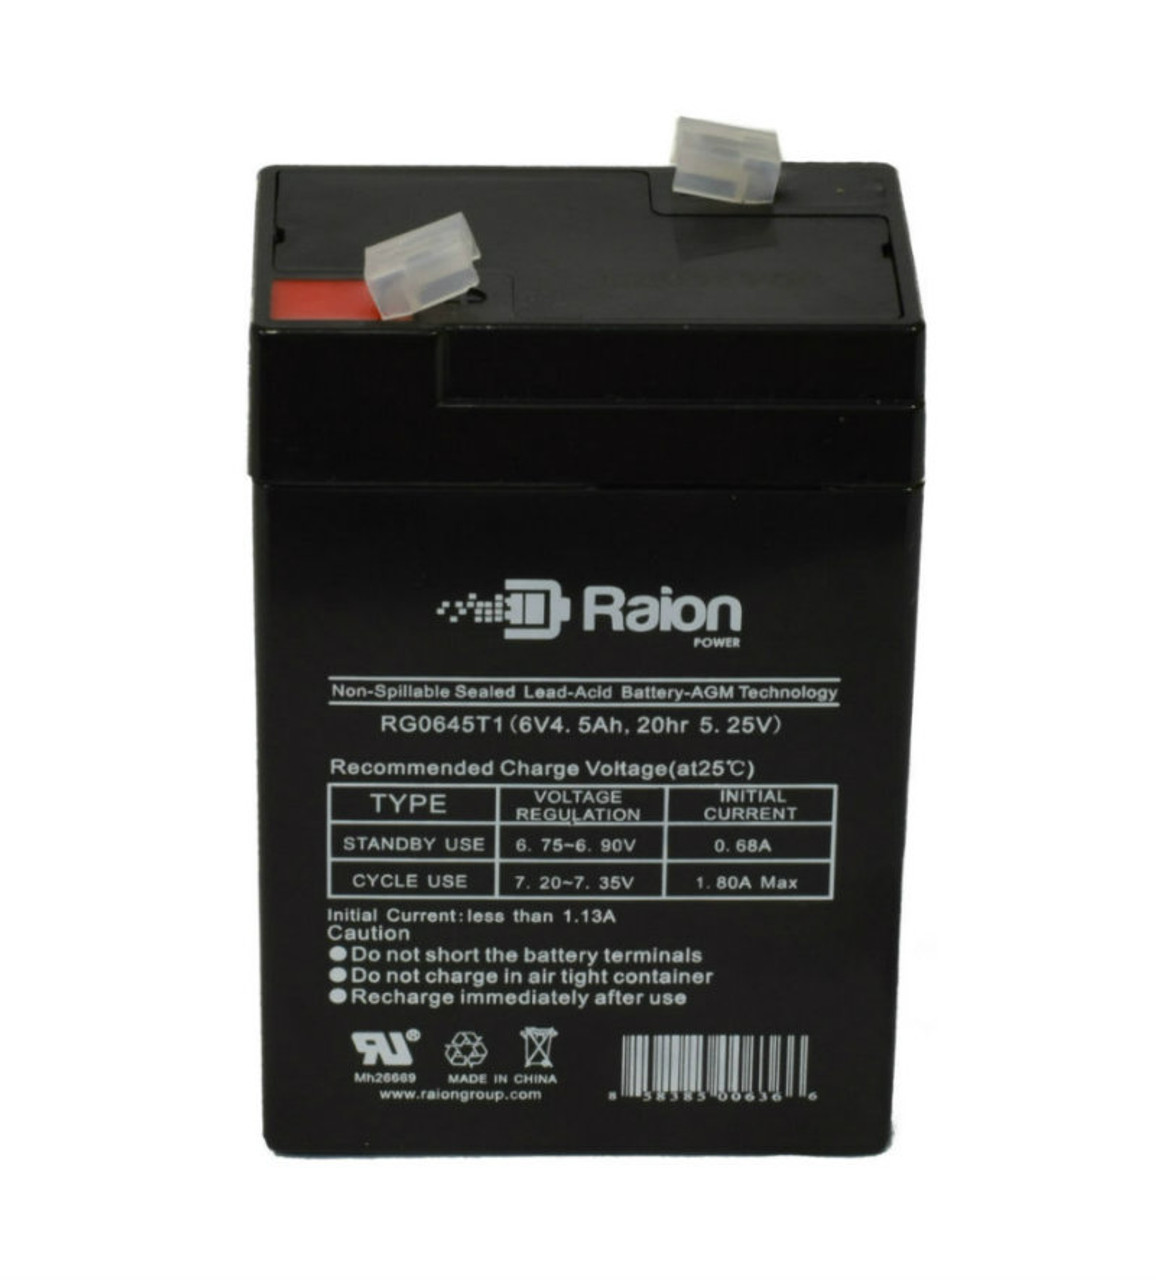 Raion Power RG0645T1 Replacement Battery Cartridge for Protocol Systems 300